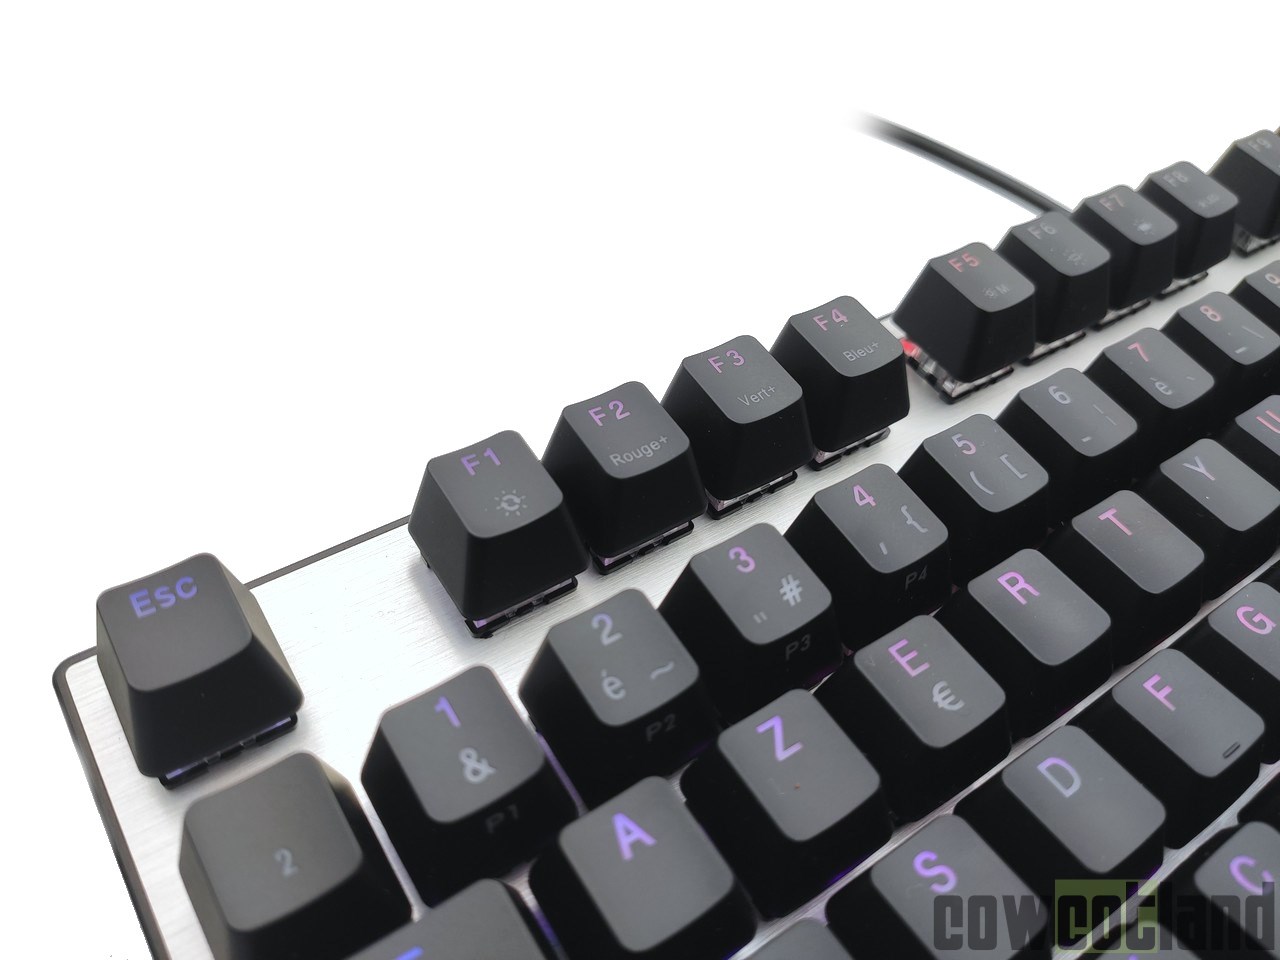 Image 46360, galerie Test clavier mcanique Cooler Master CK351 : switches optiques et hot-swappables !